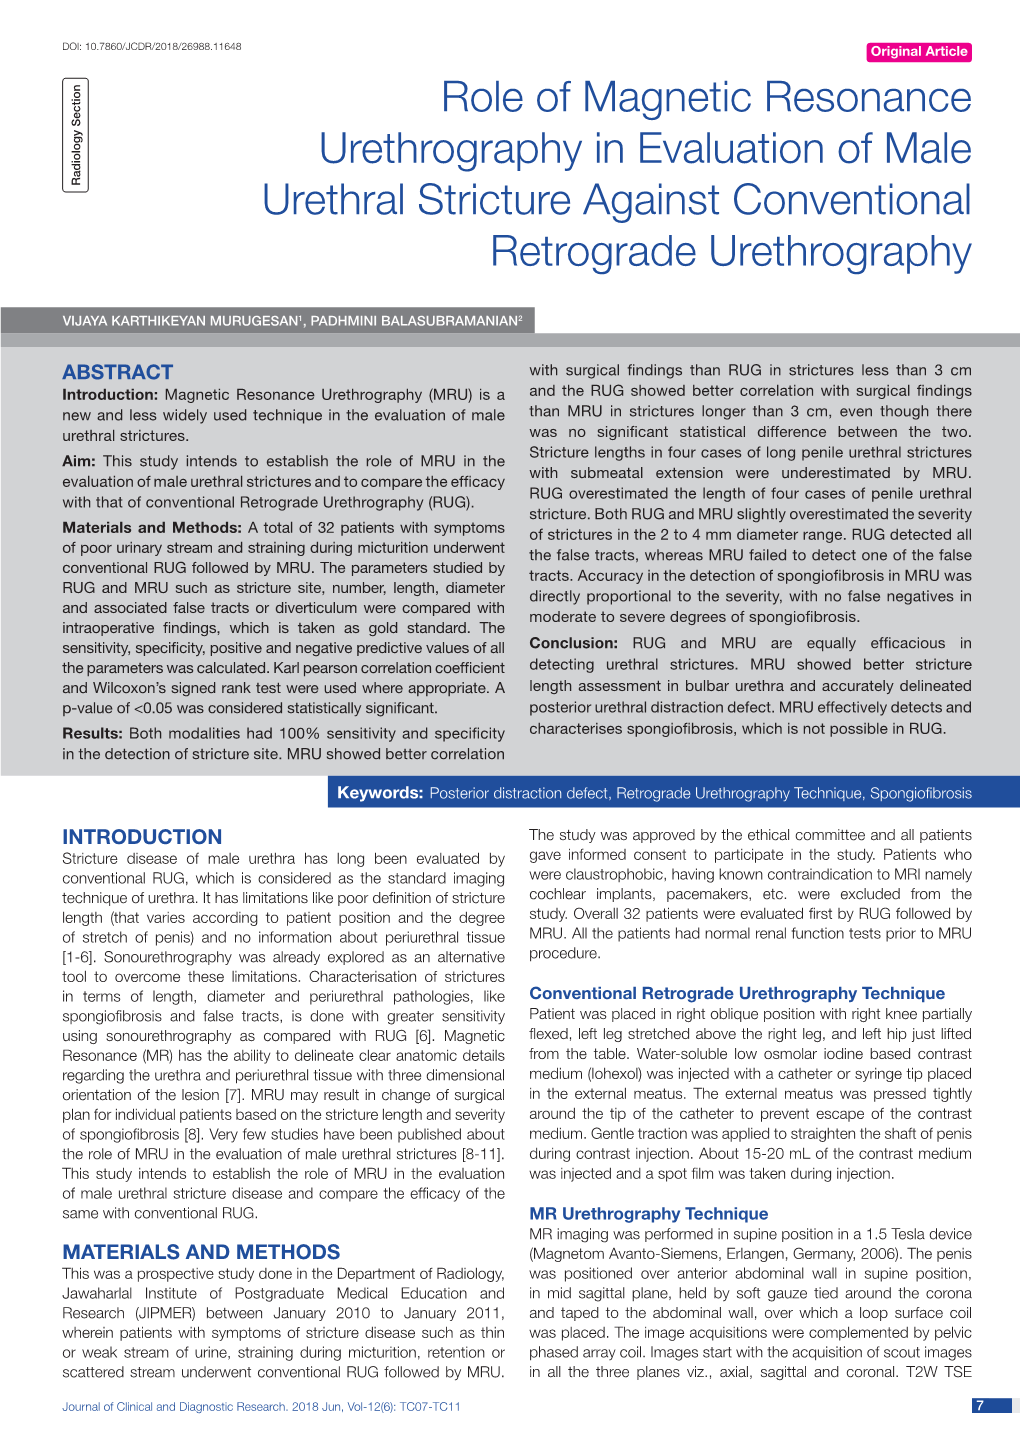 Role of Magnetic Resonance Urethrography in Evaluation of Male Urethral Stricture Against Conventional Retrograde Urethrography